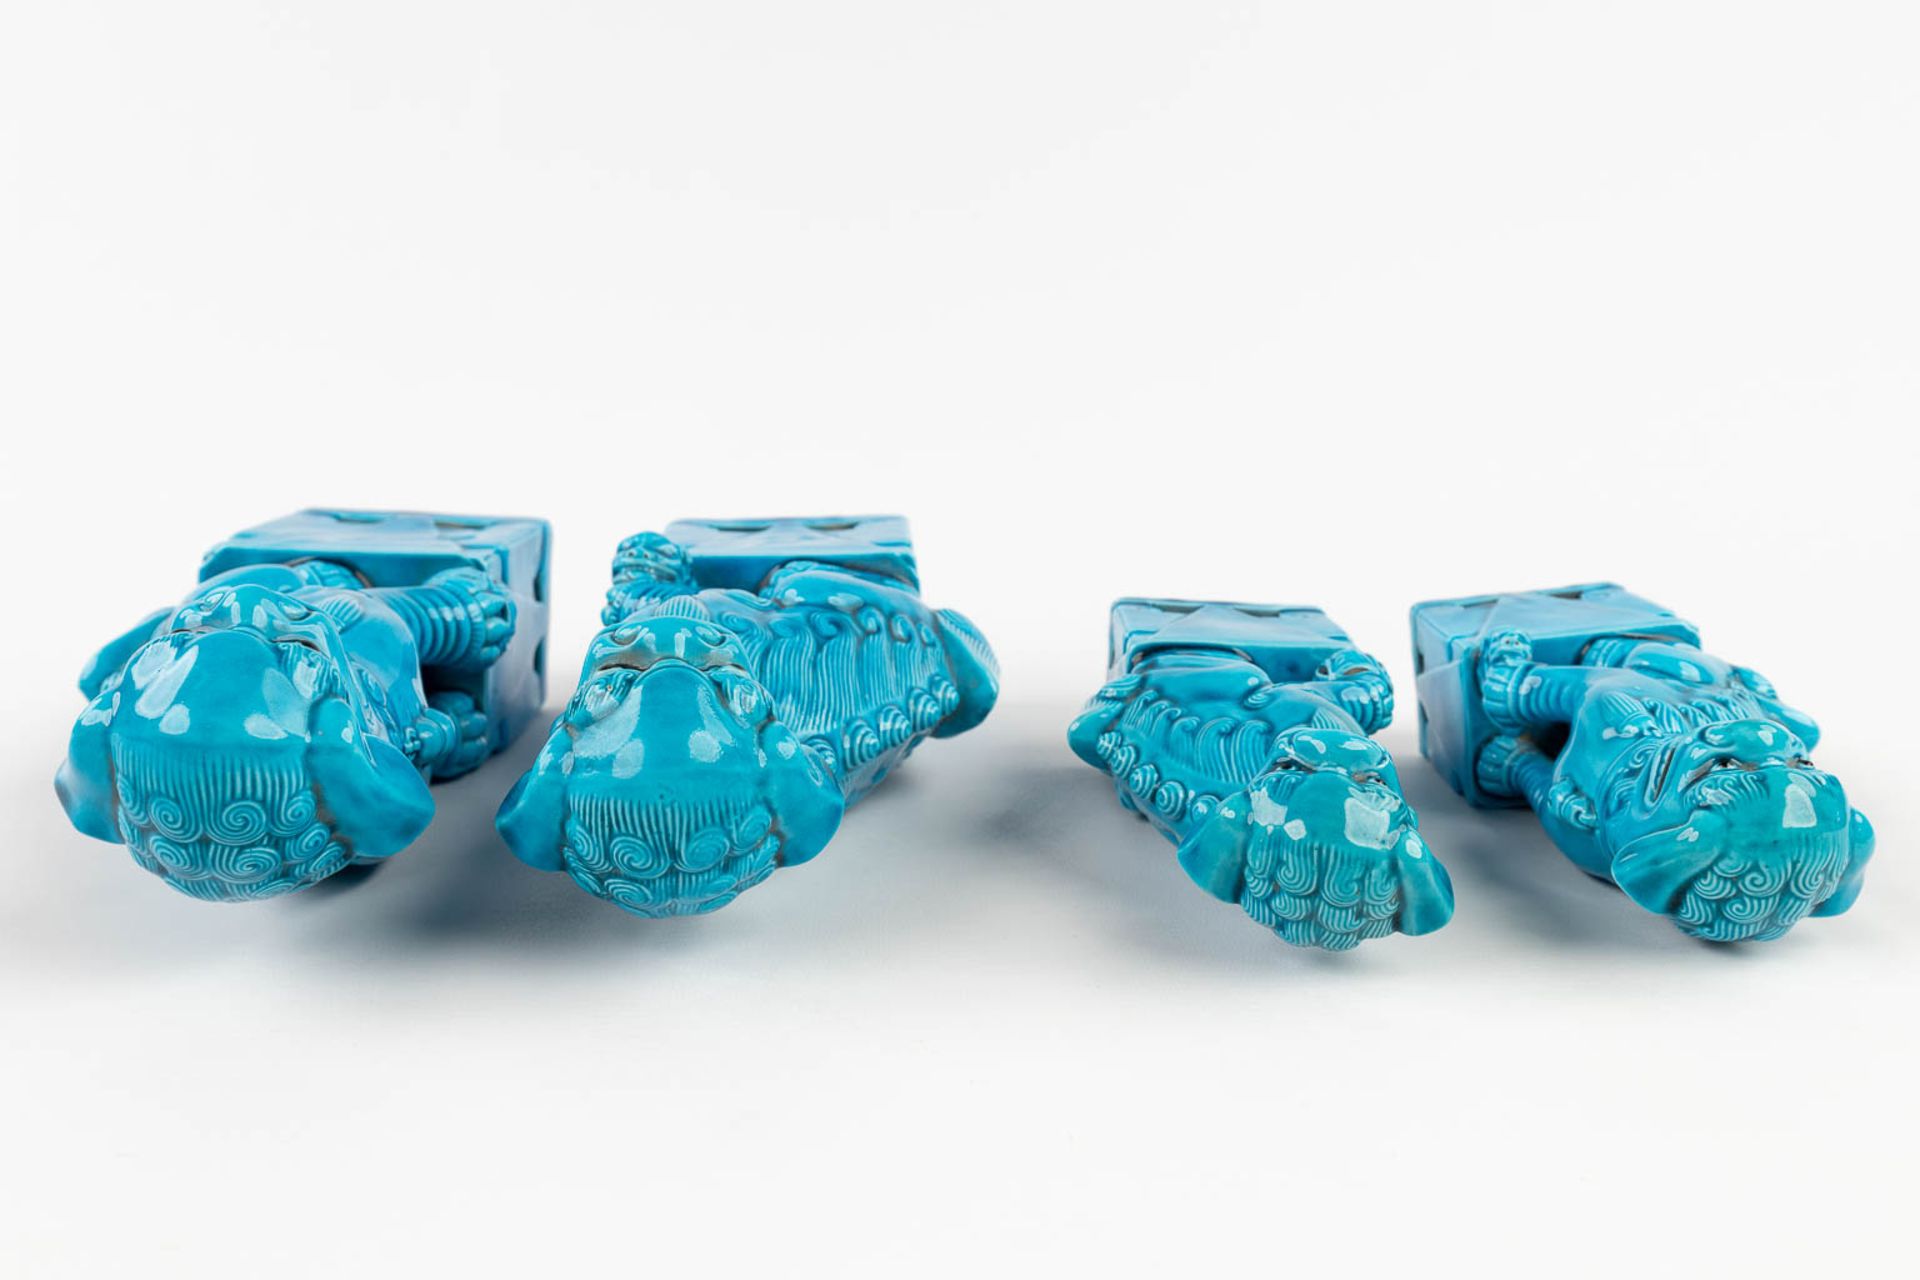 A collection of 2 pairs of Foo dogs, made of blue glazed ceramics. 20th C. (L: 8 x W: 11 x H: 30 cm) - Image 8 of 12